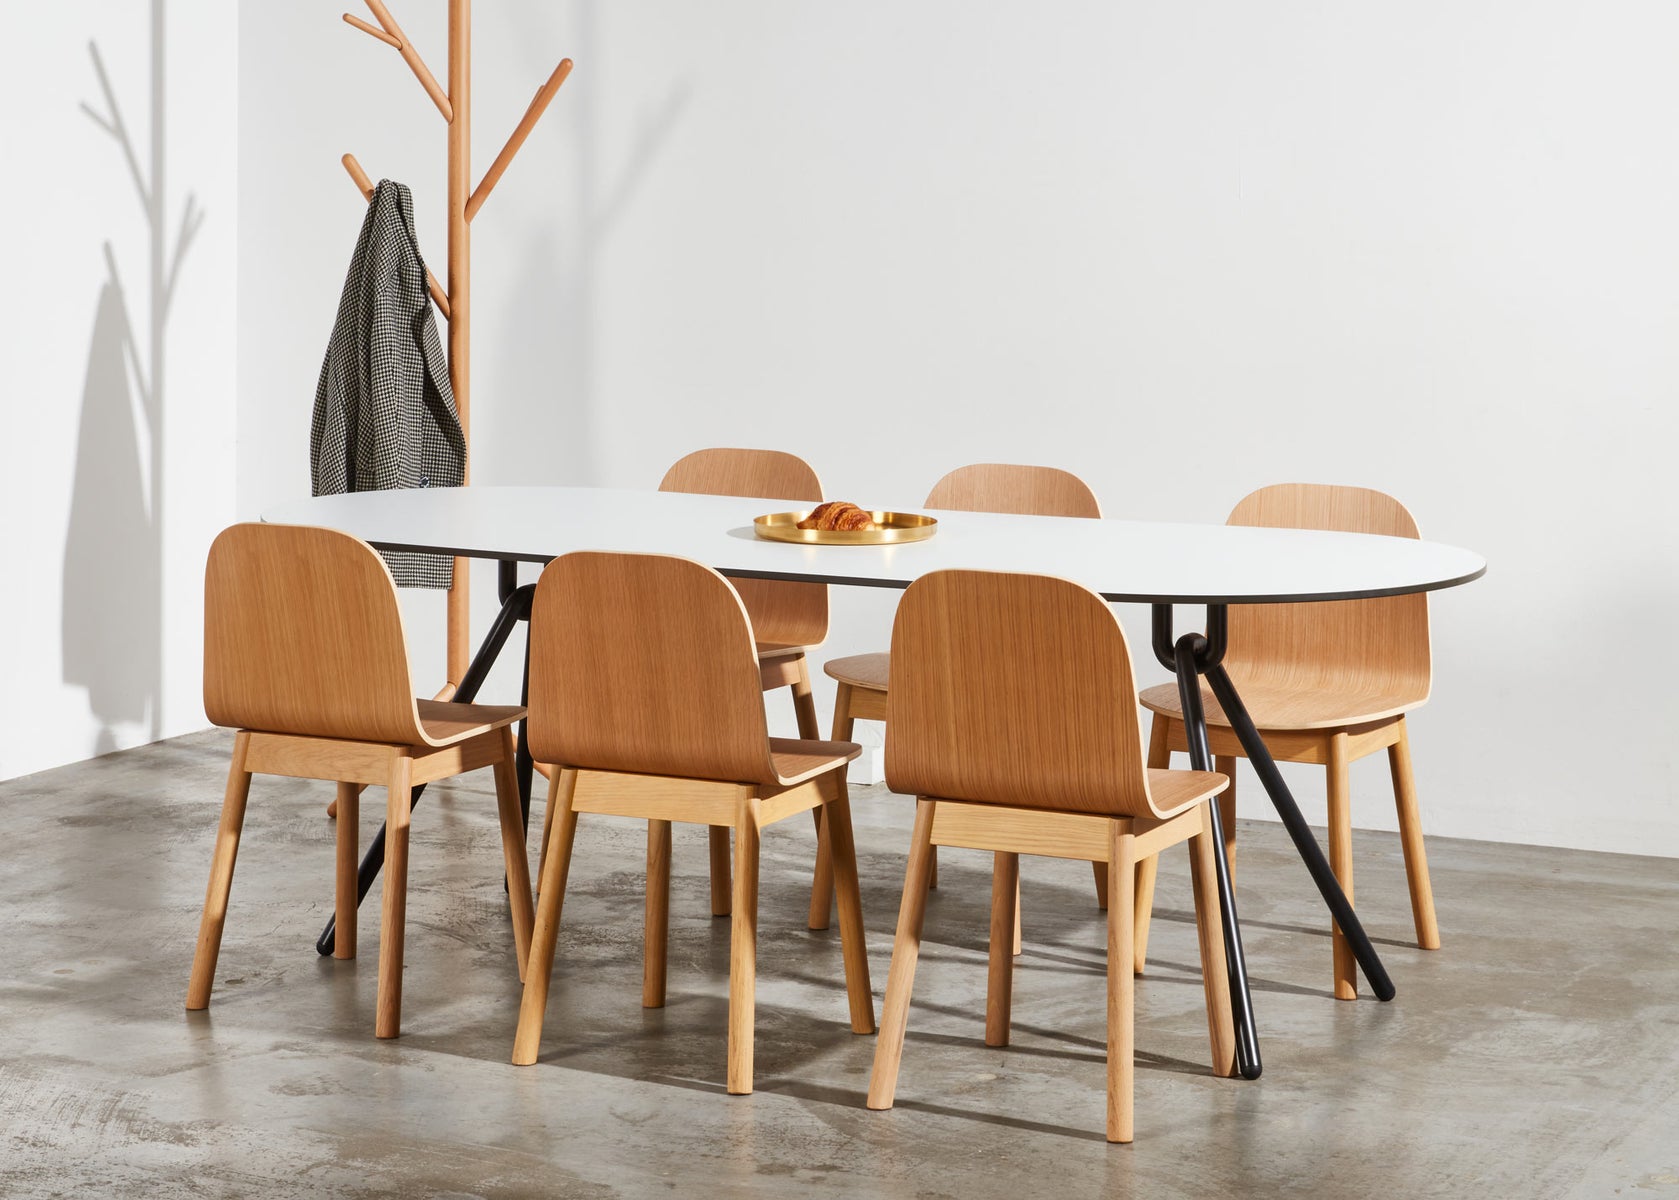 Potato Chair | Timber Dining Office Chair with Handle | GibsonKarlo | DesignByThem | Gallery